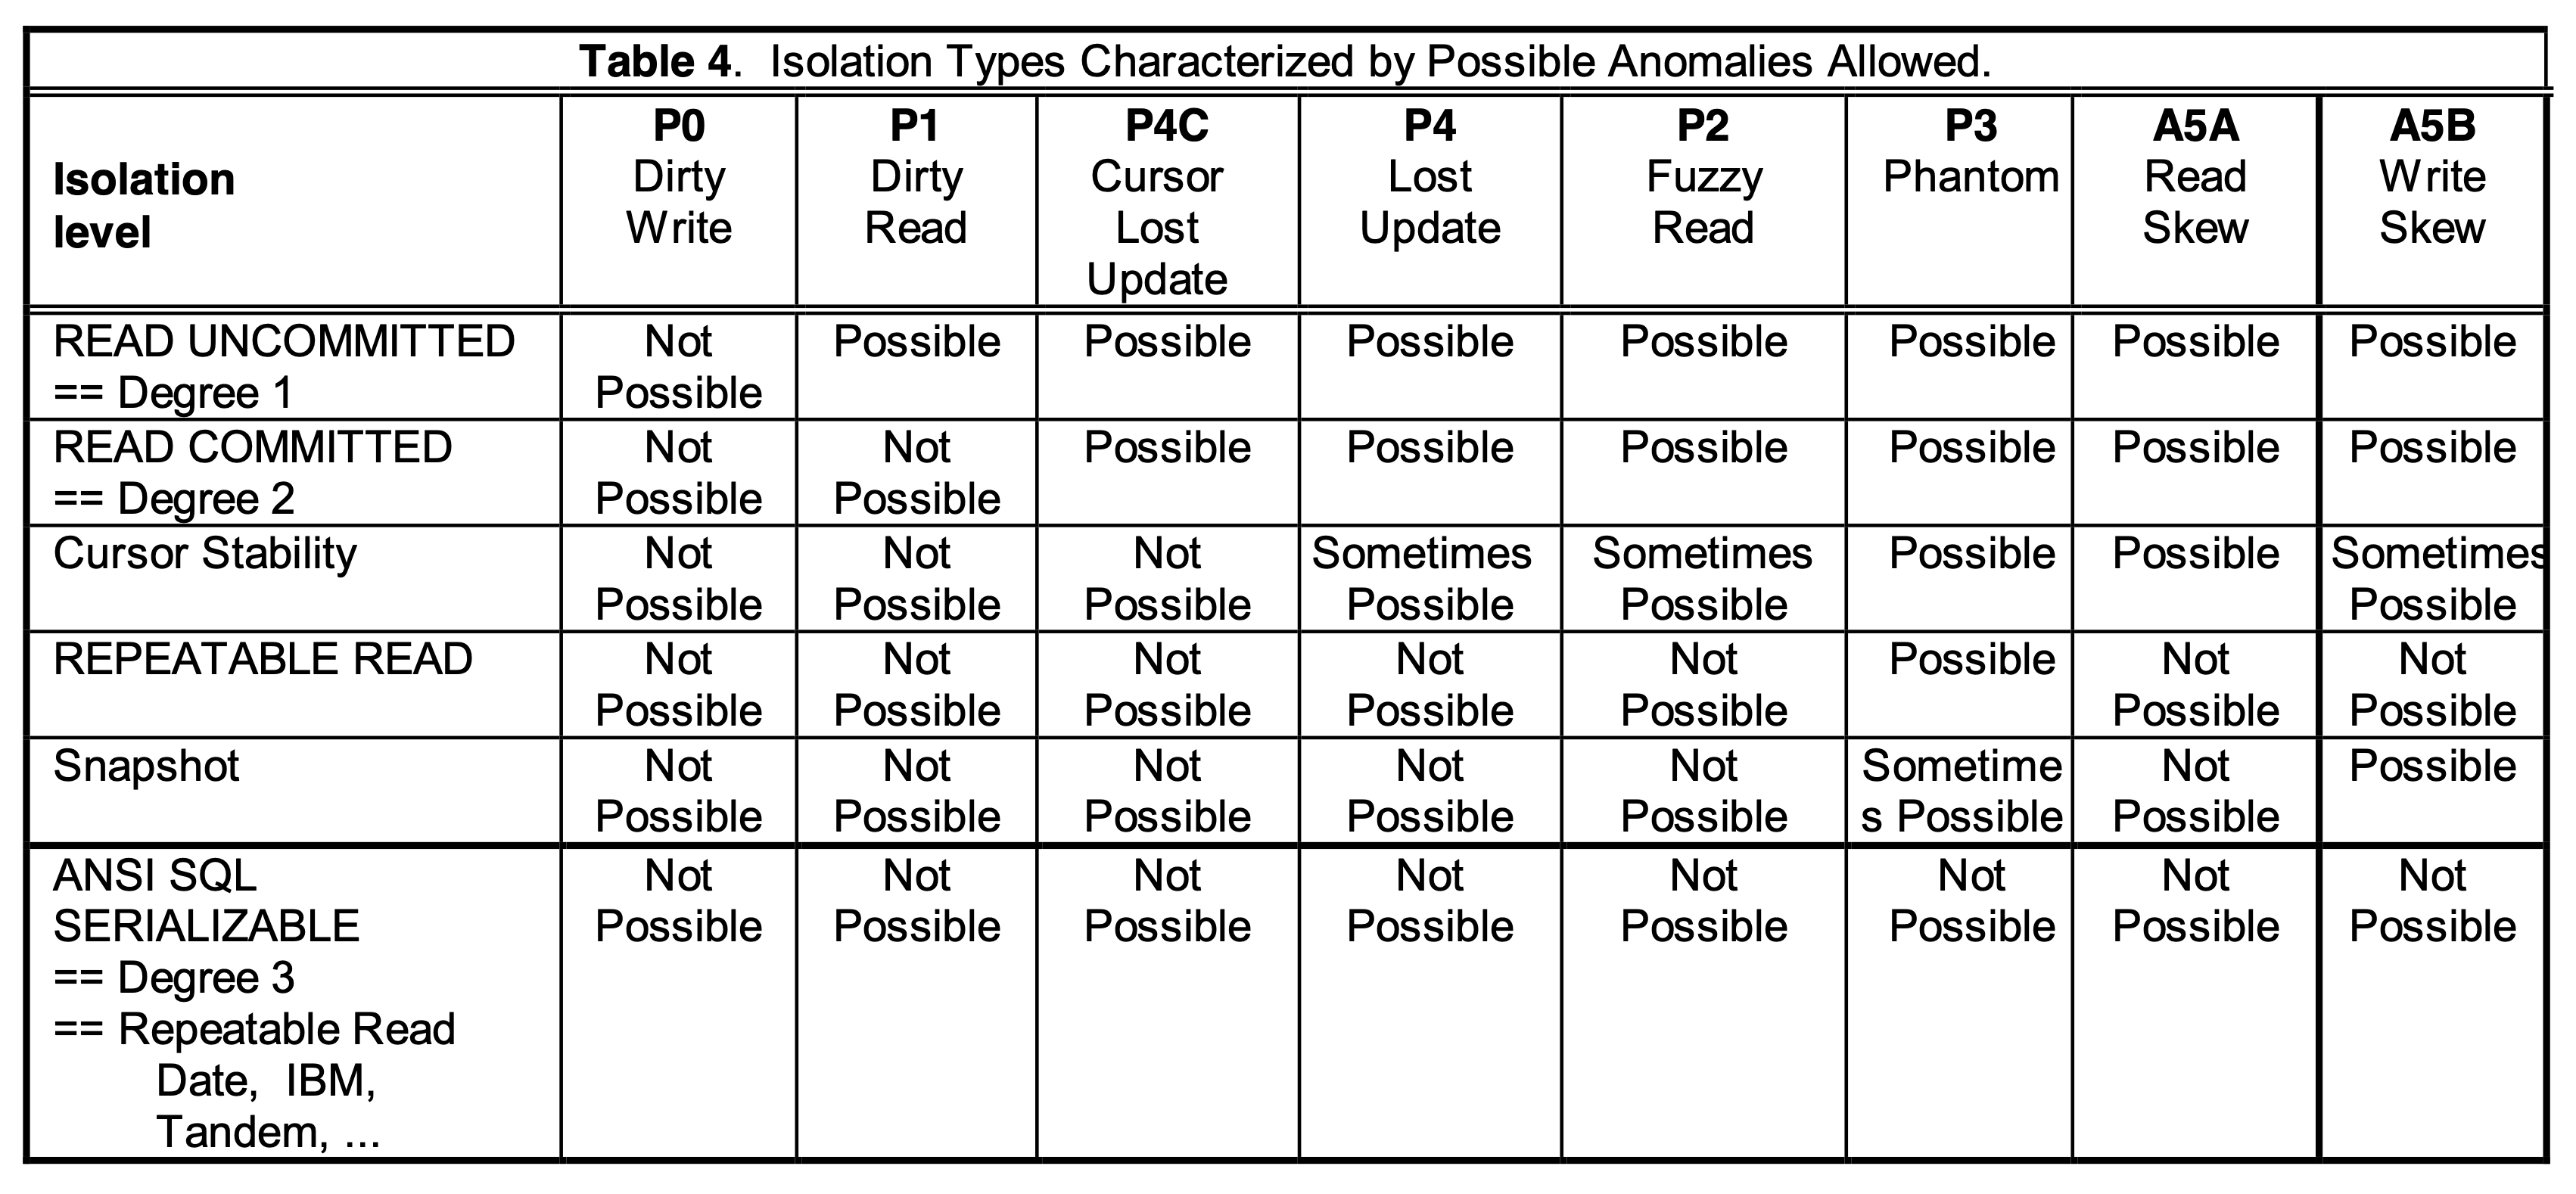 Isolation types characterized by possible anomalies allowed